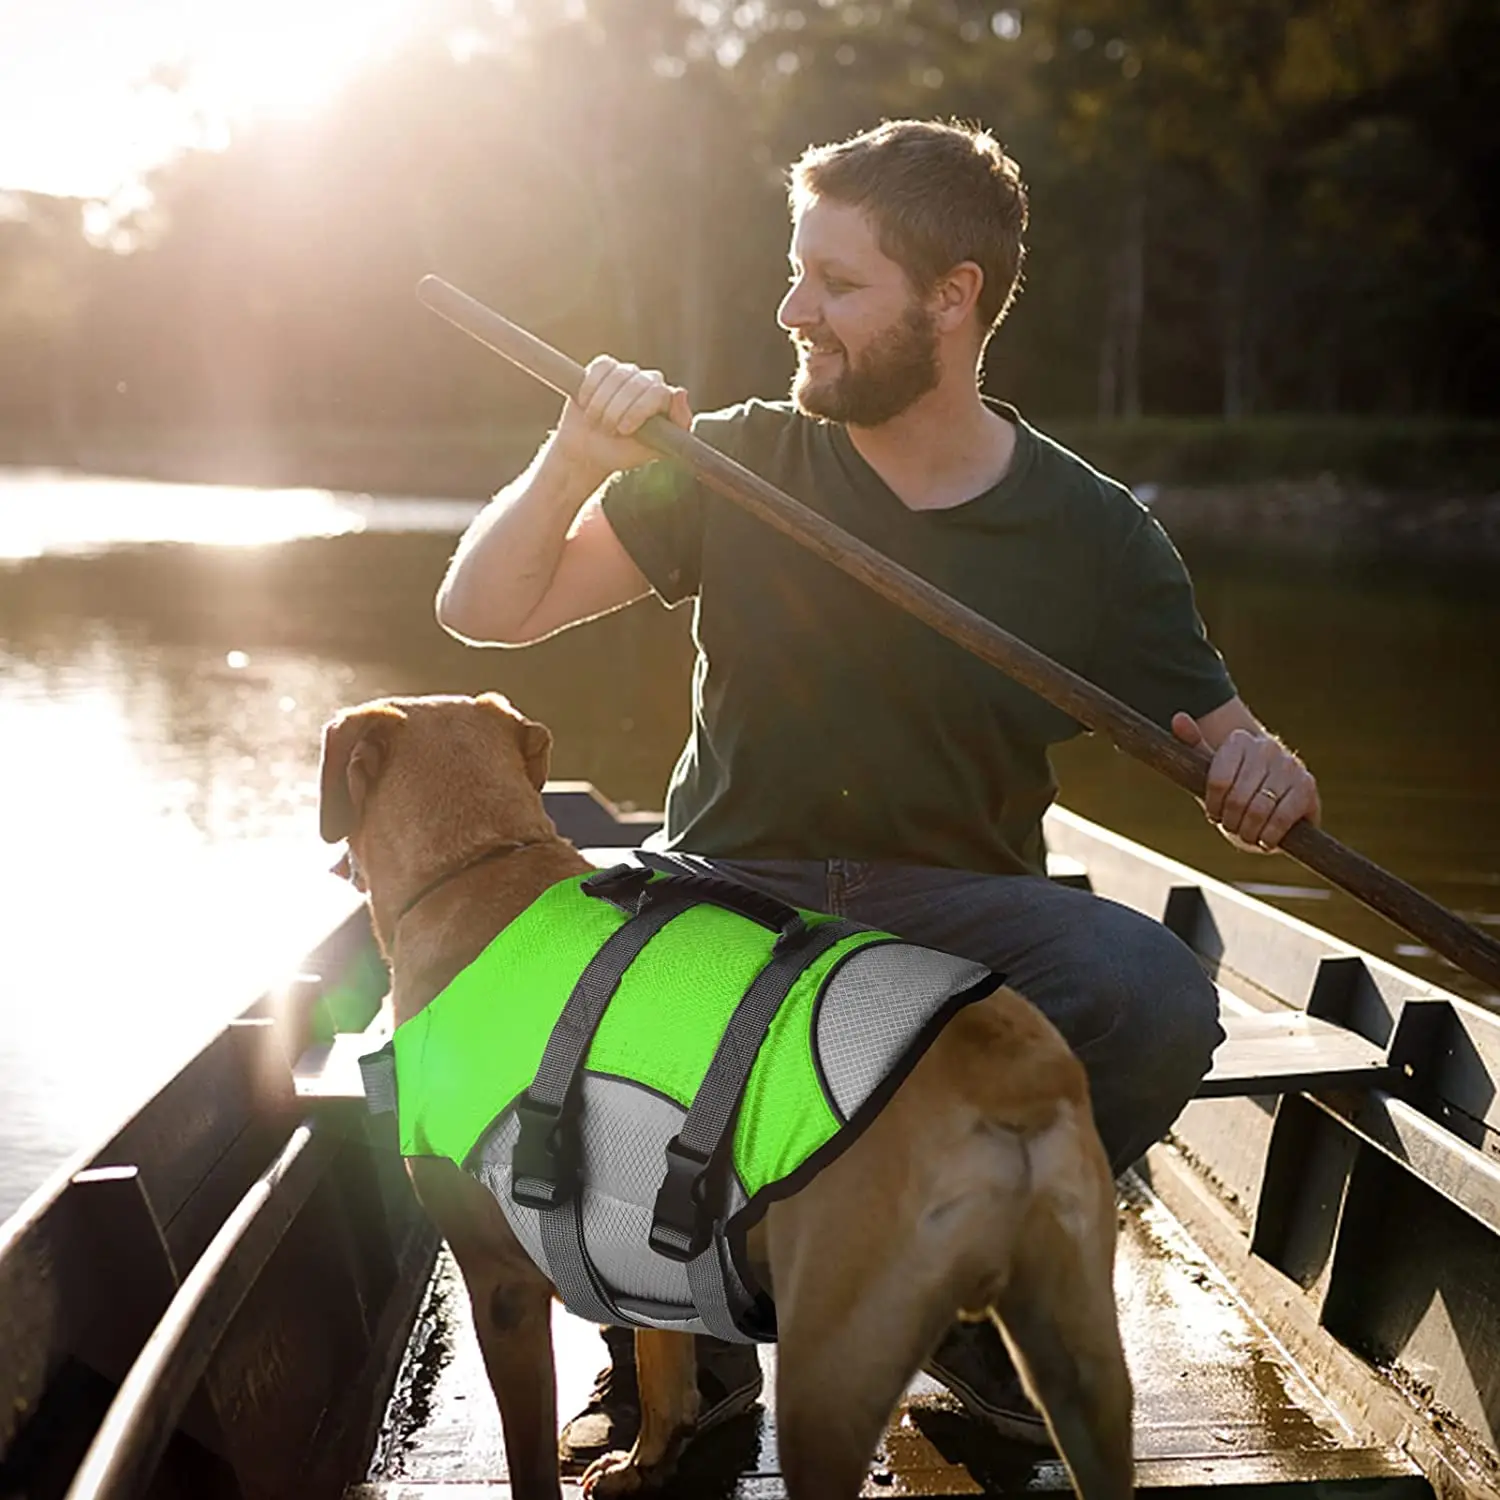 

Dog For Rescue Dogs Swimming Vest Sport Life Vests Dog Pet Puppy Adjustable All Clothes Float Reflective Safety Suit Jacket